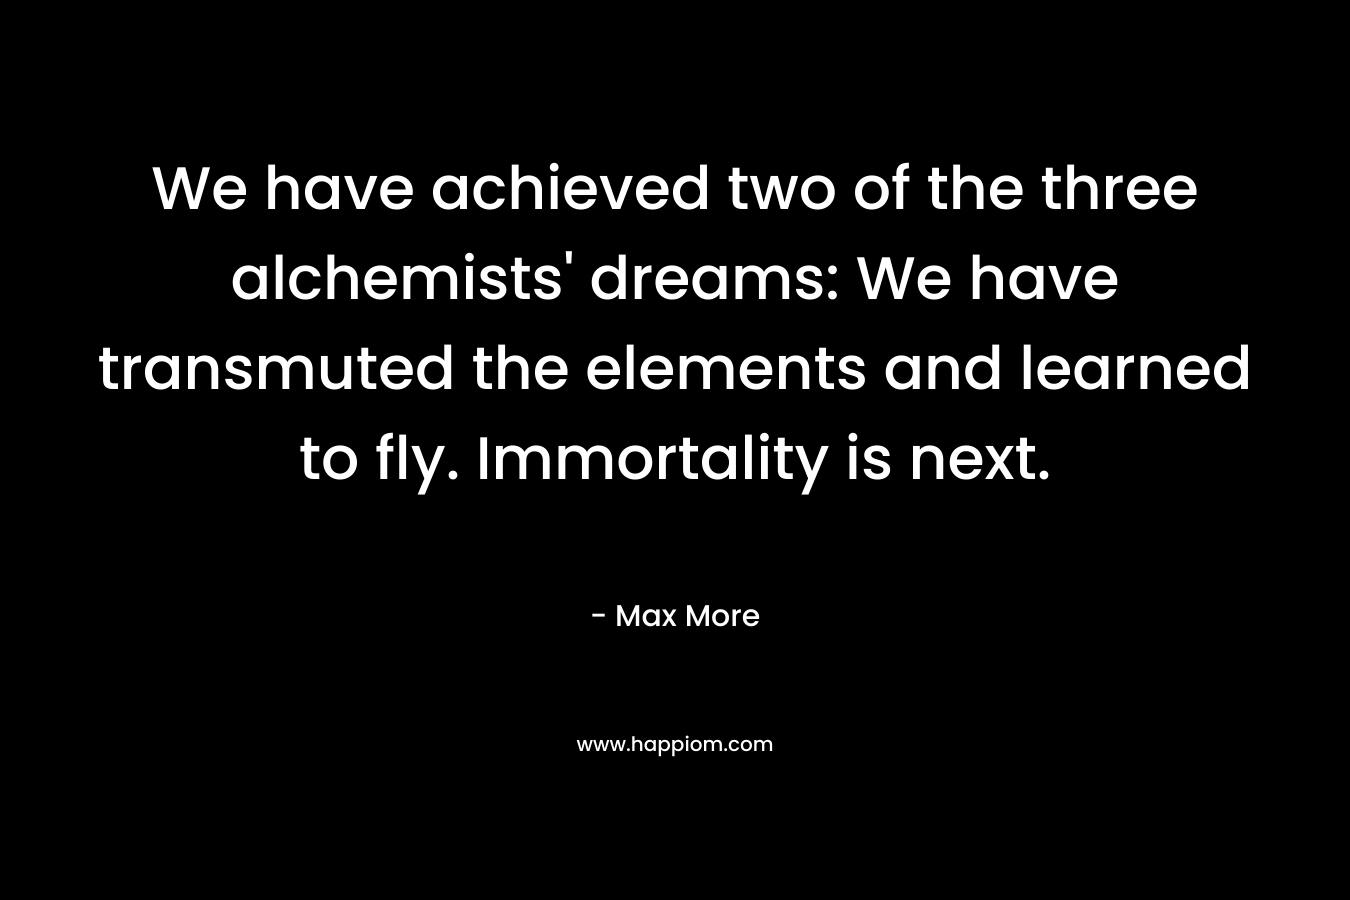 We have achieved two of the three alchemists’ dreams: We have transmuted the elements and learned to fly. Immortality is next. – Max More